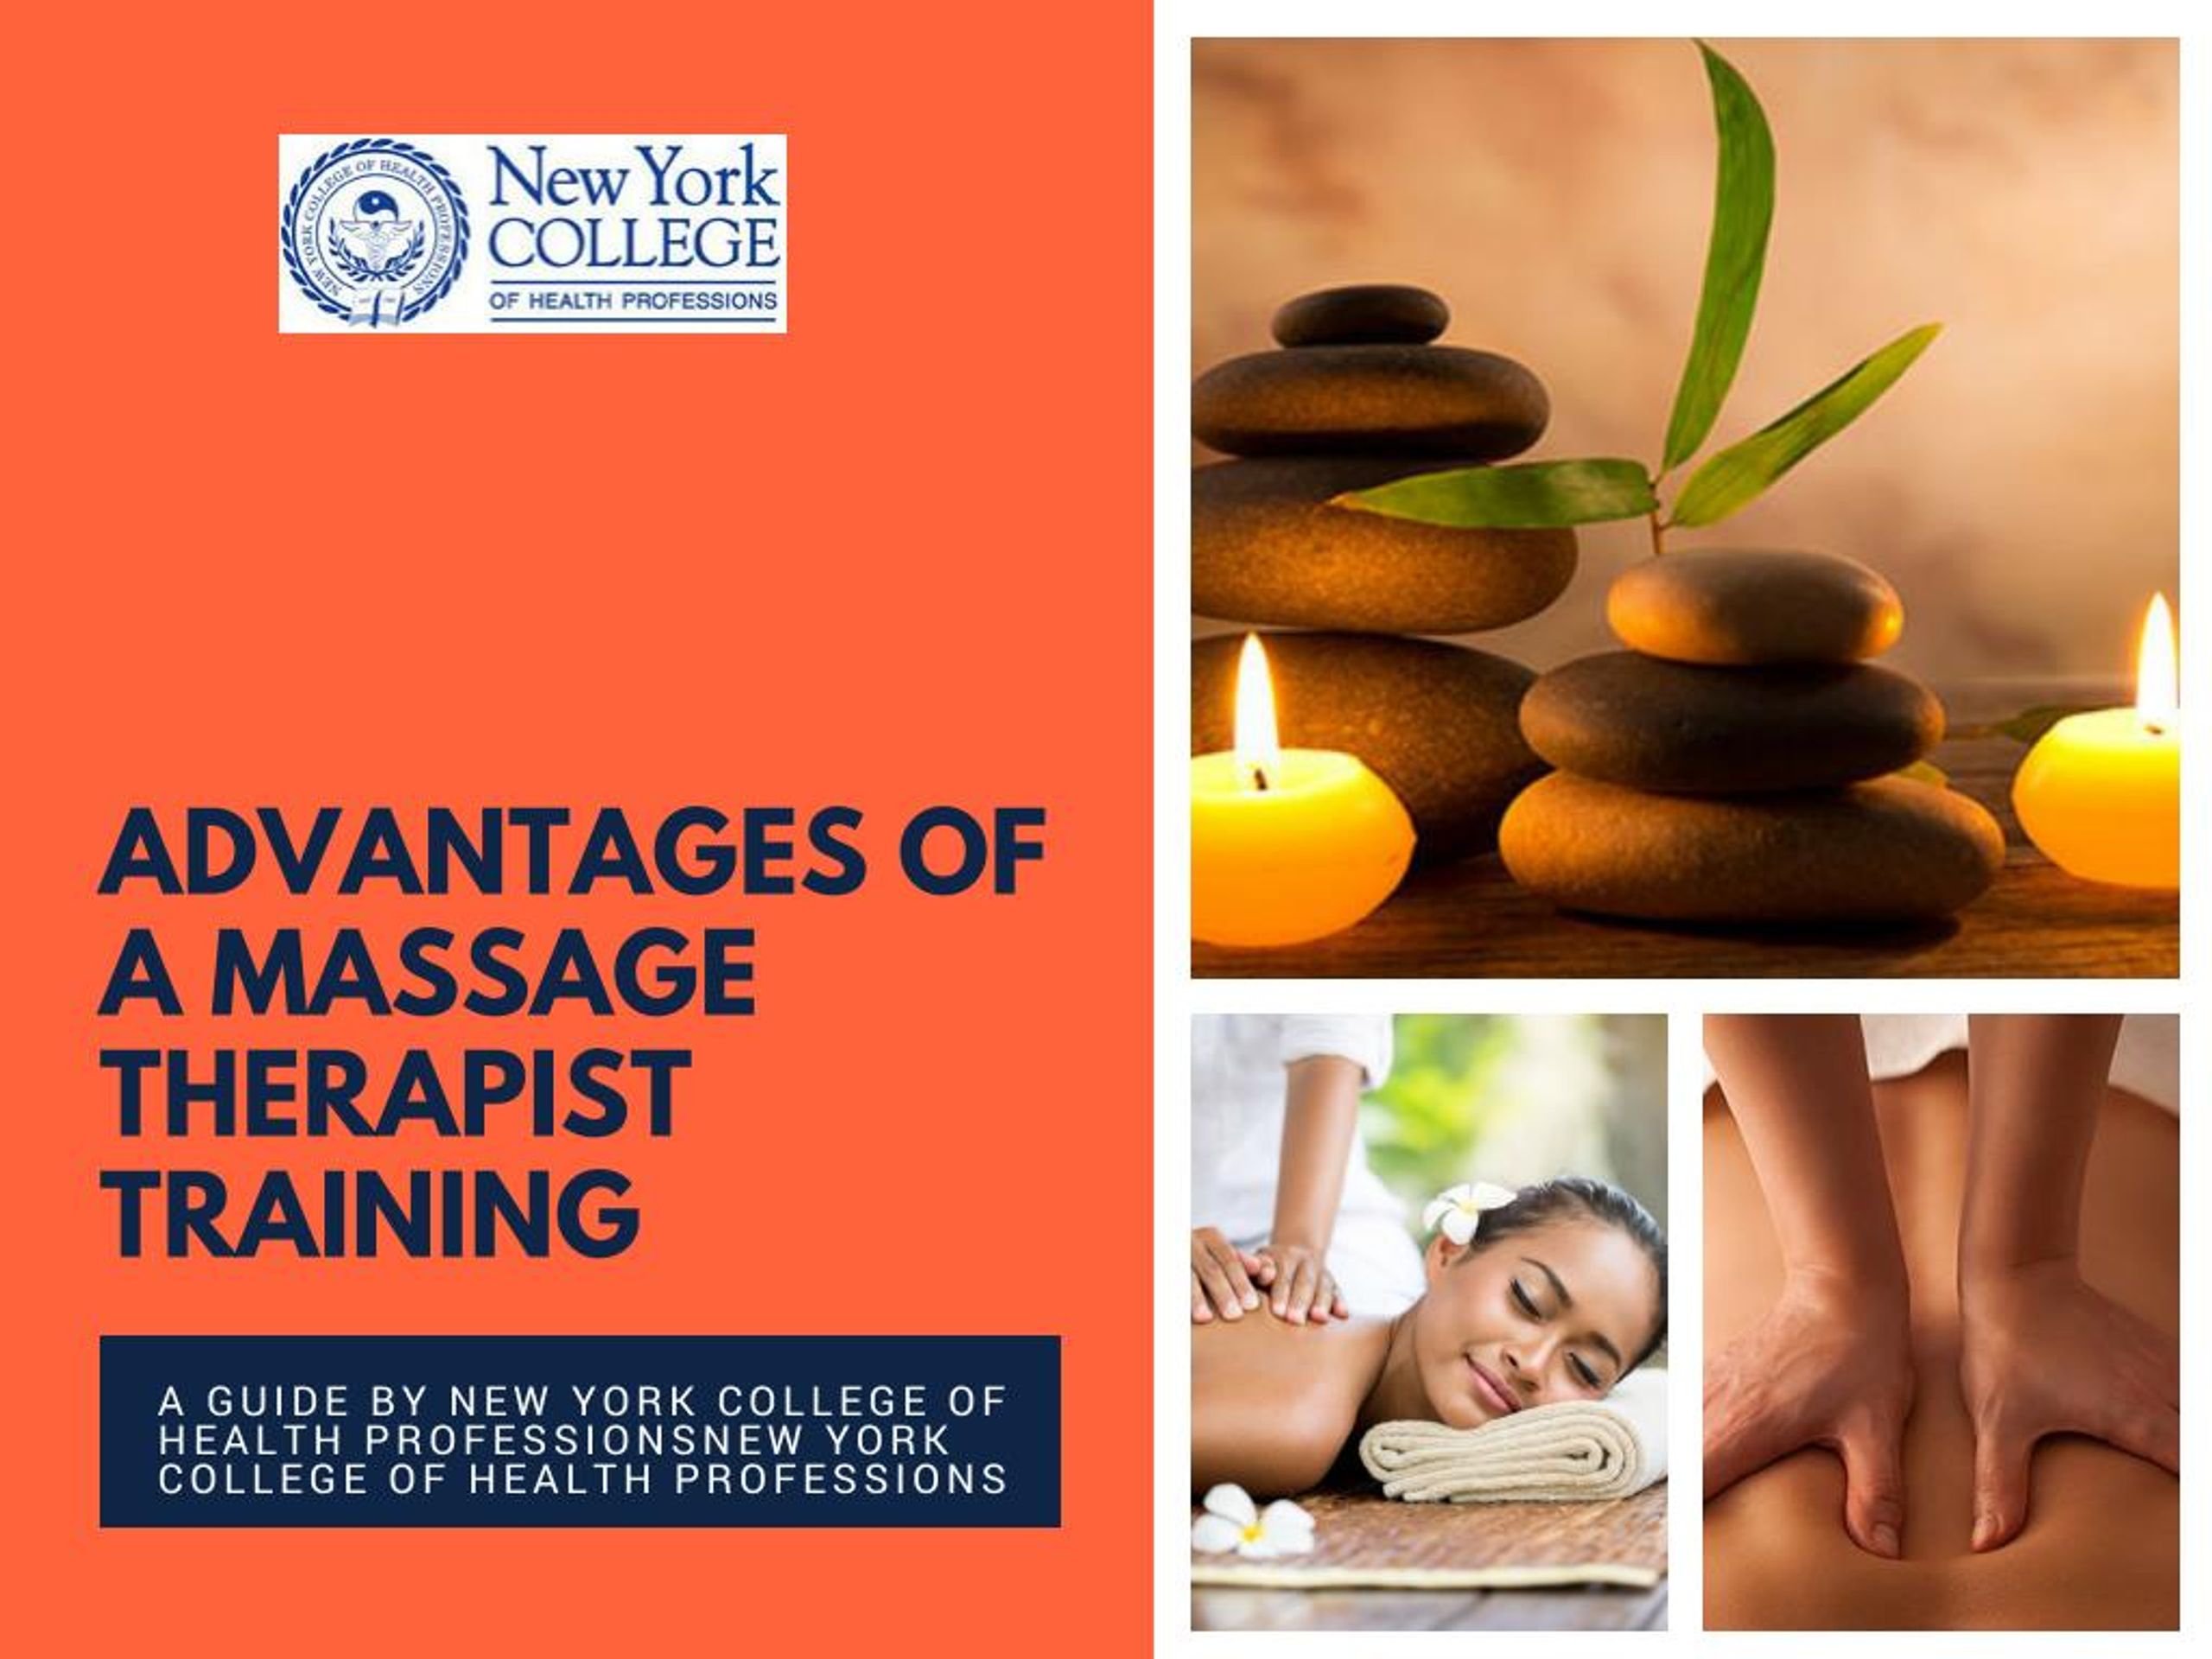 Ppt New York College Of Health Professions Advantages Of A Massage Therapist Training 5062